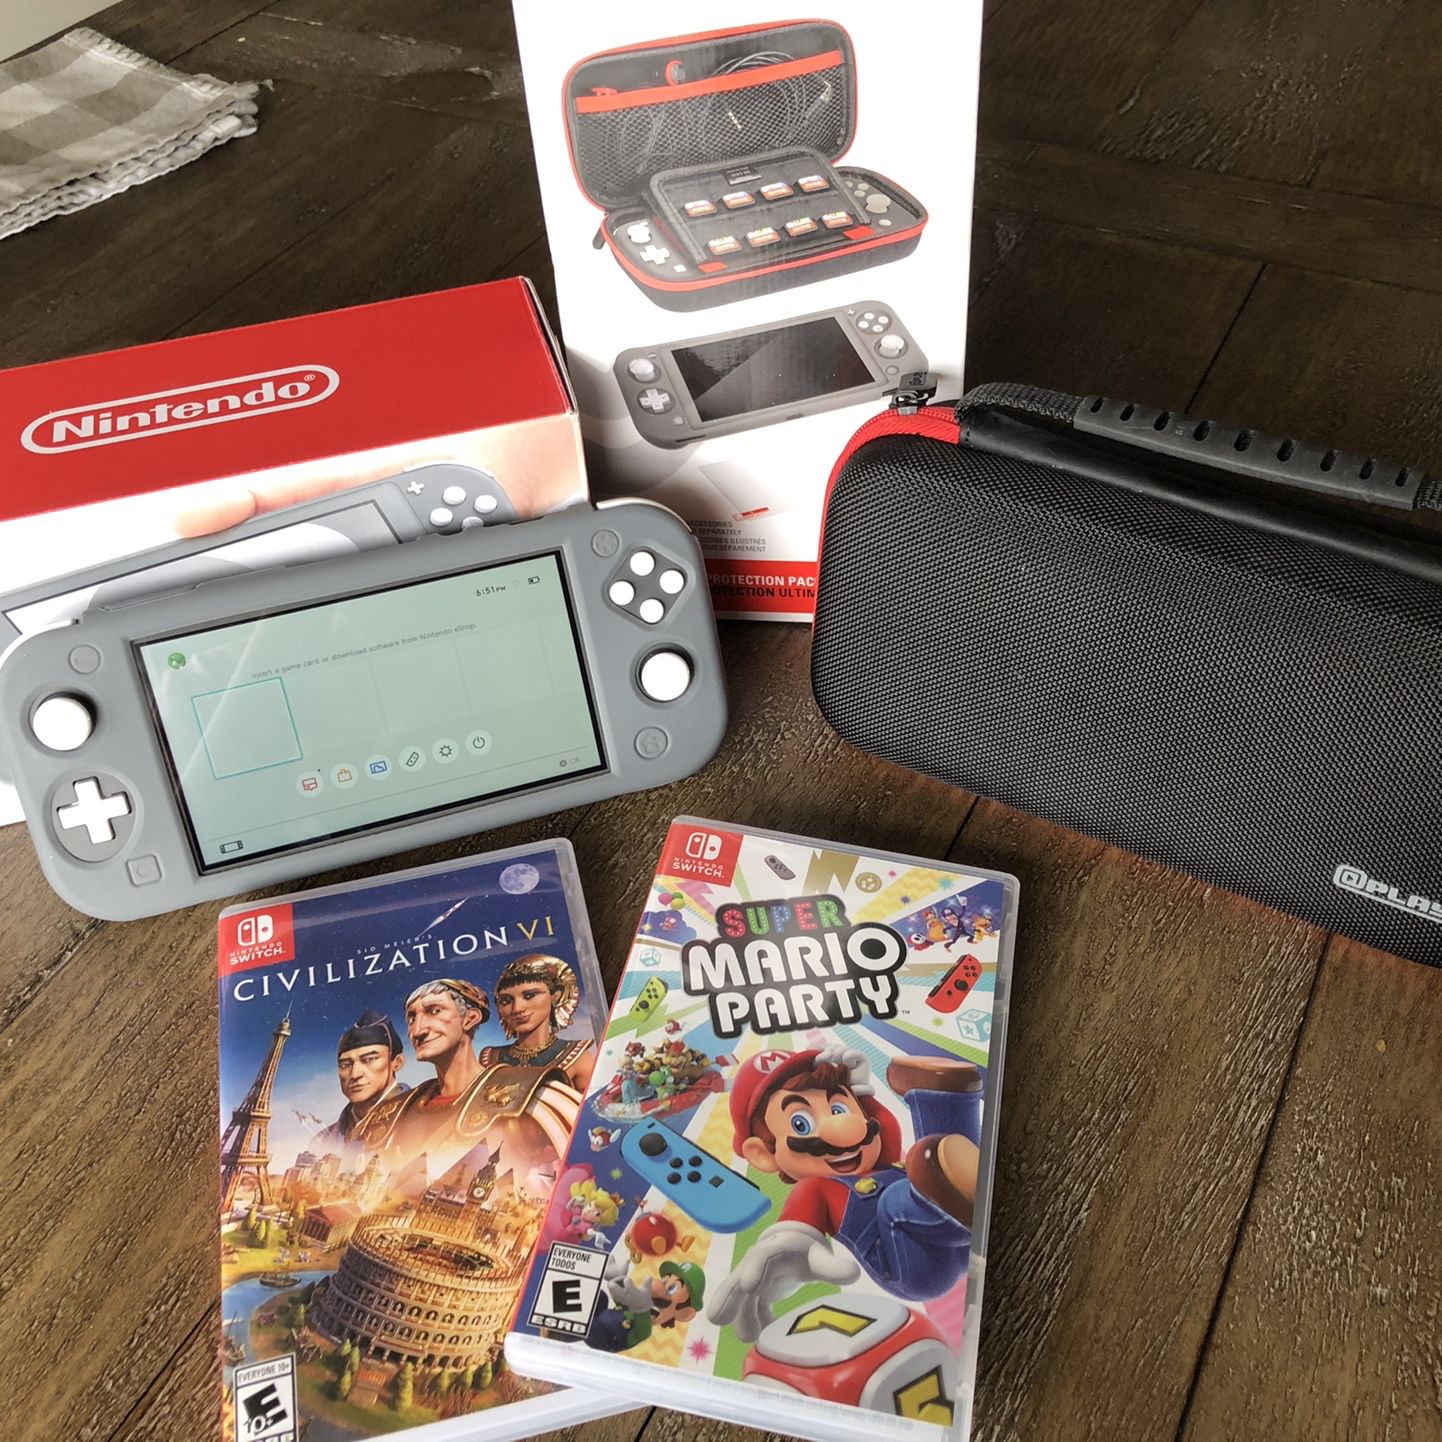 Like New Nintendo Switch Lite with boxes and 2 Games. (Civilizaton 6, Mario Party)